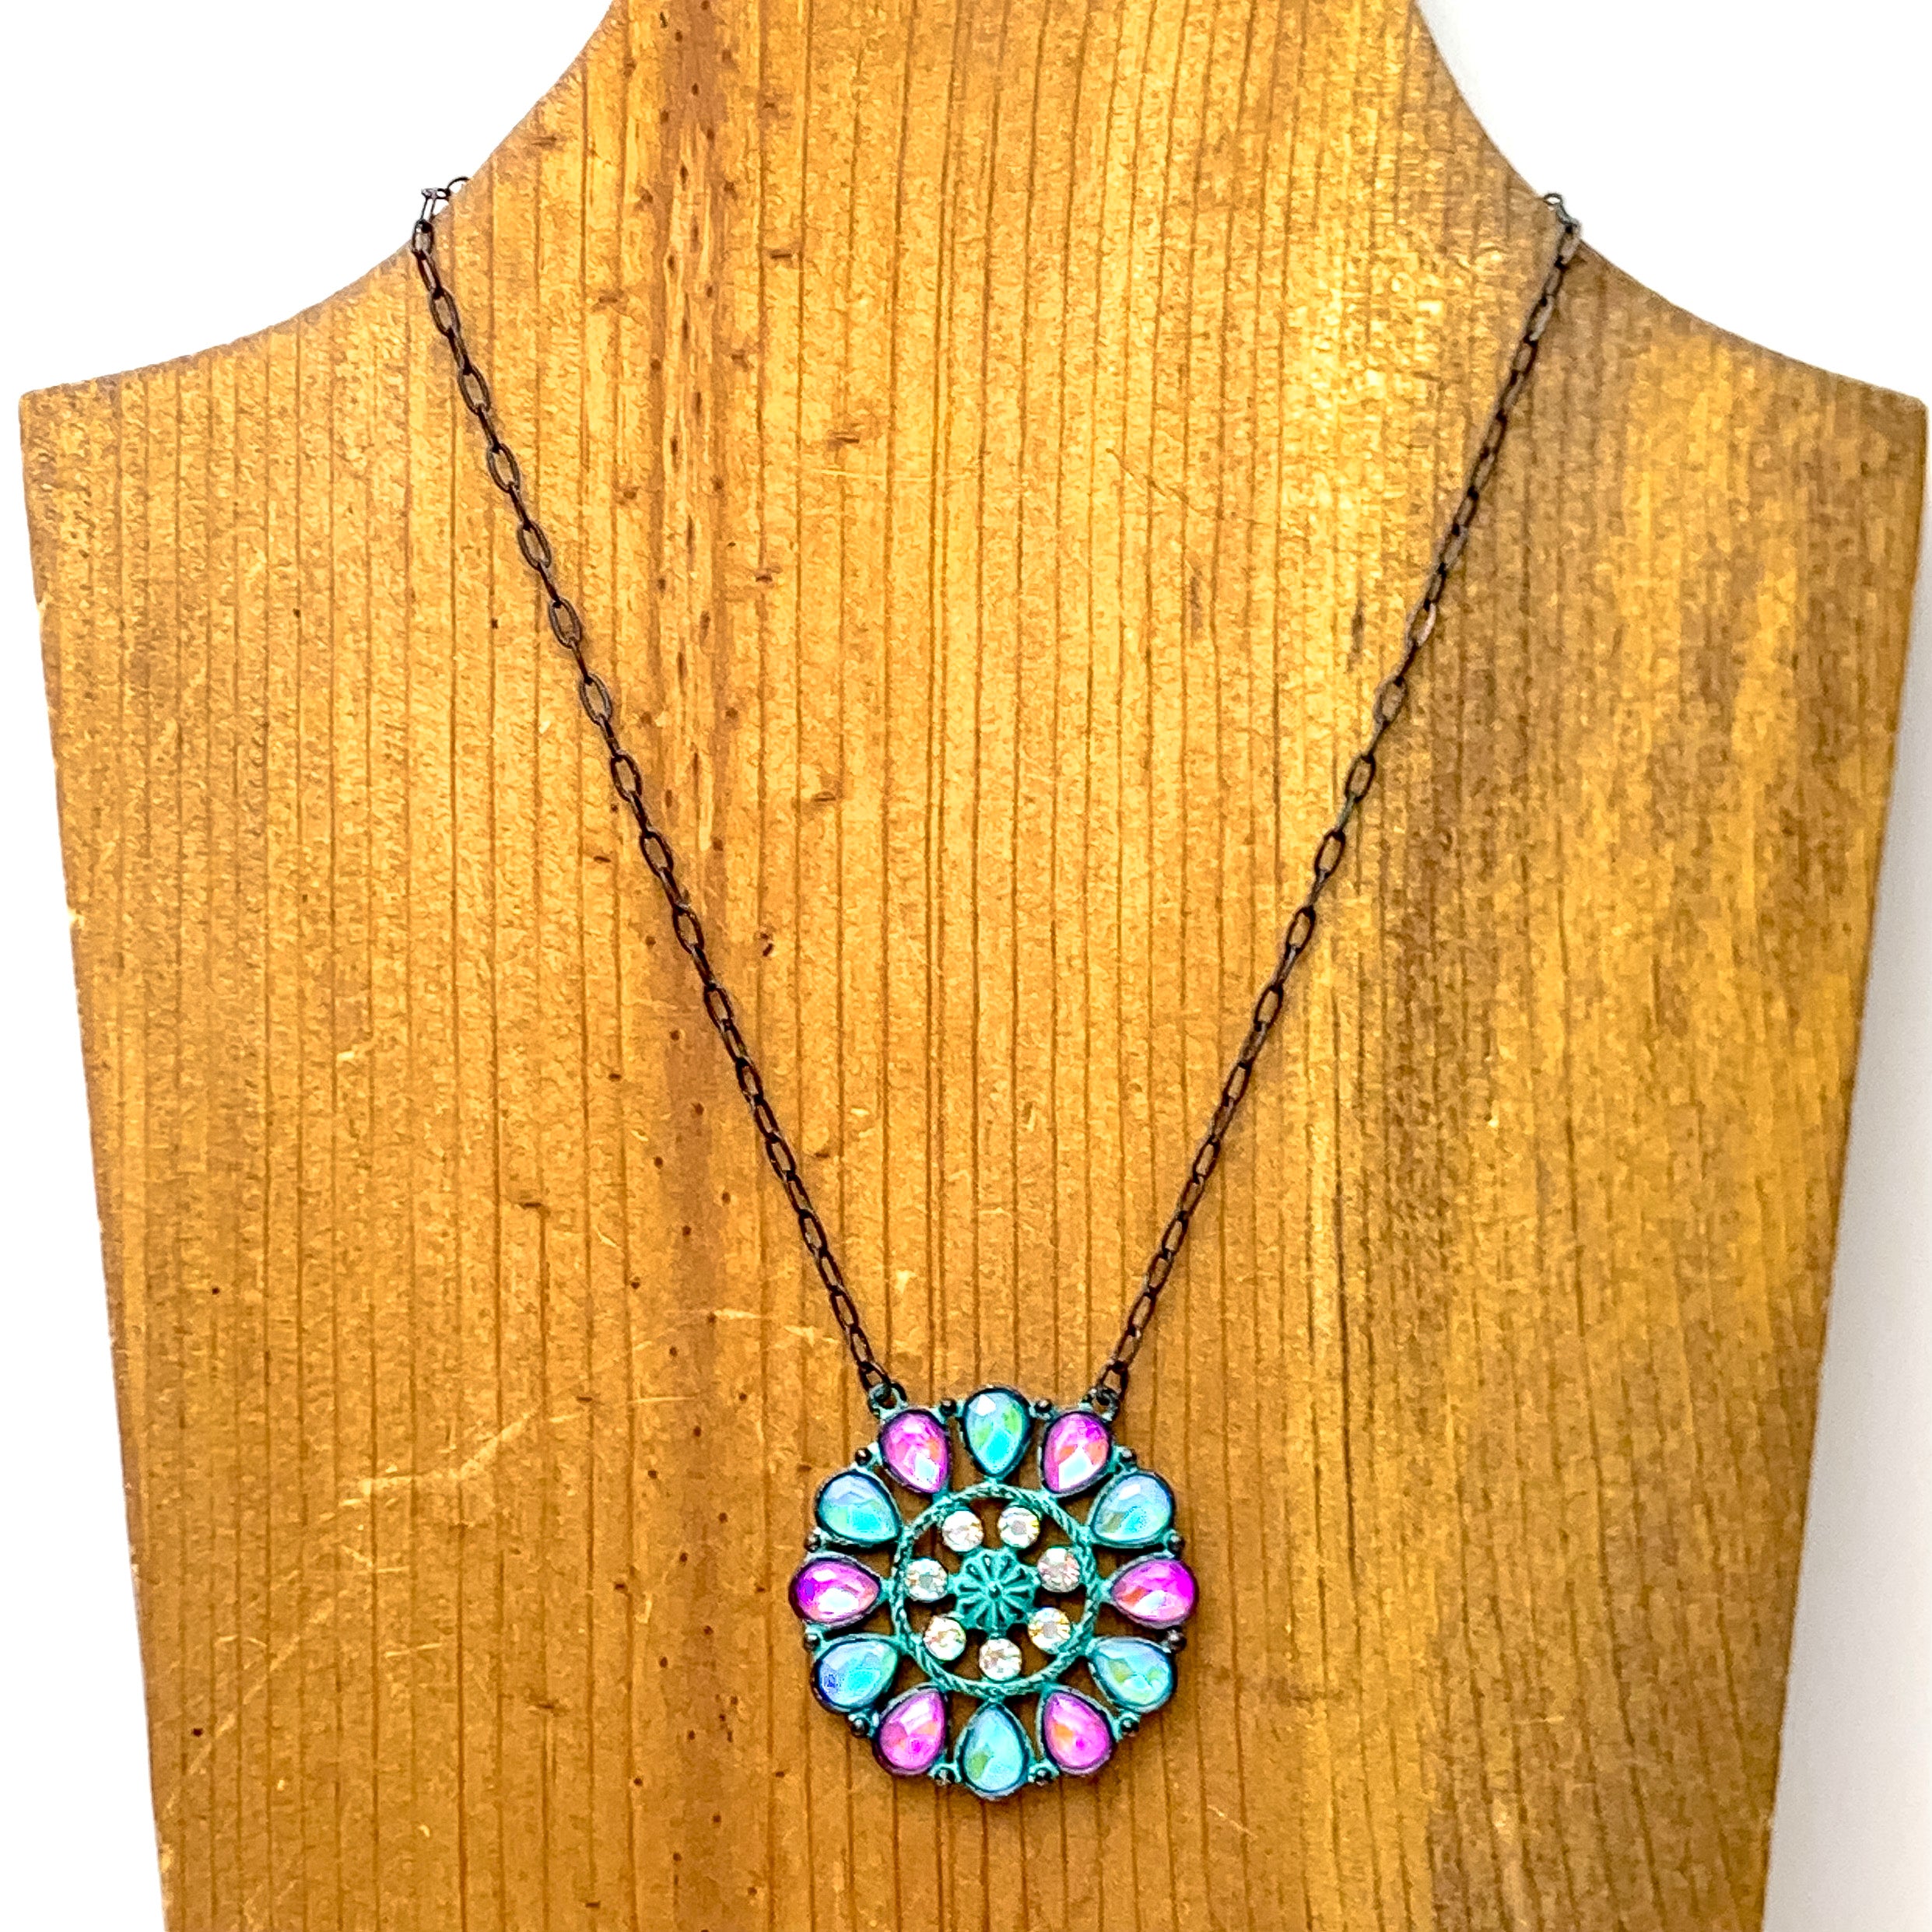 Desert Daisy Patina Tone Flower Concho Necklace in Pink and Turquoise - Giddy Up Glamour Boutique